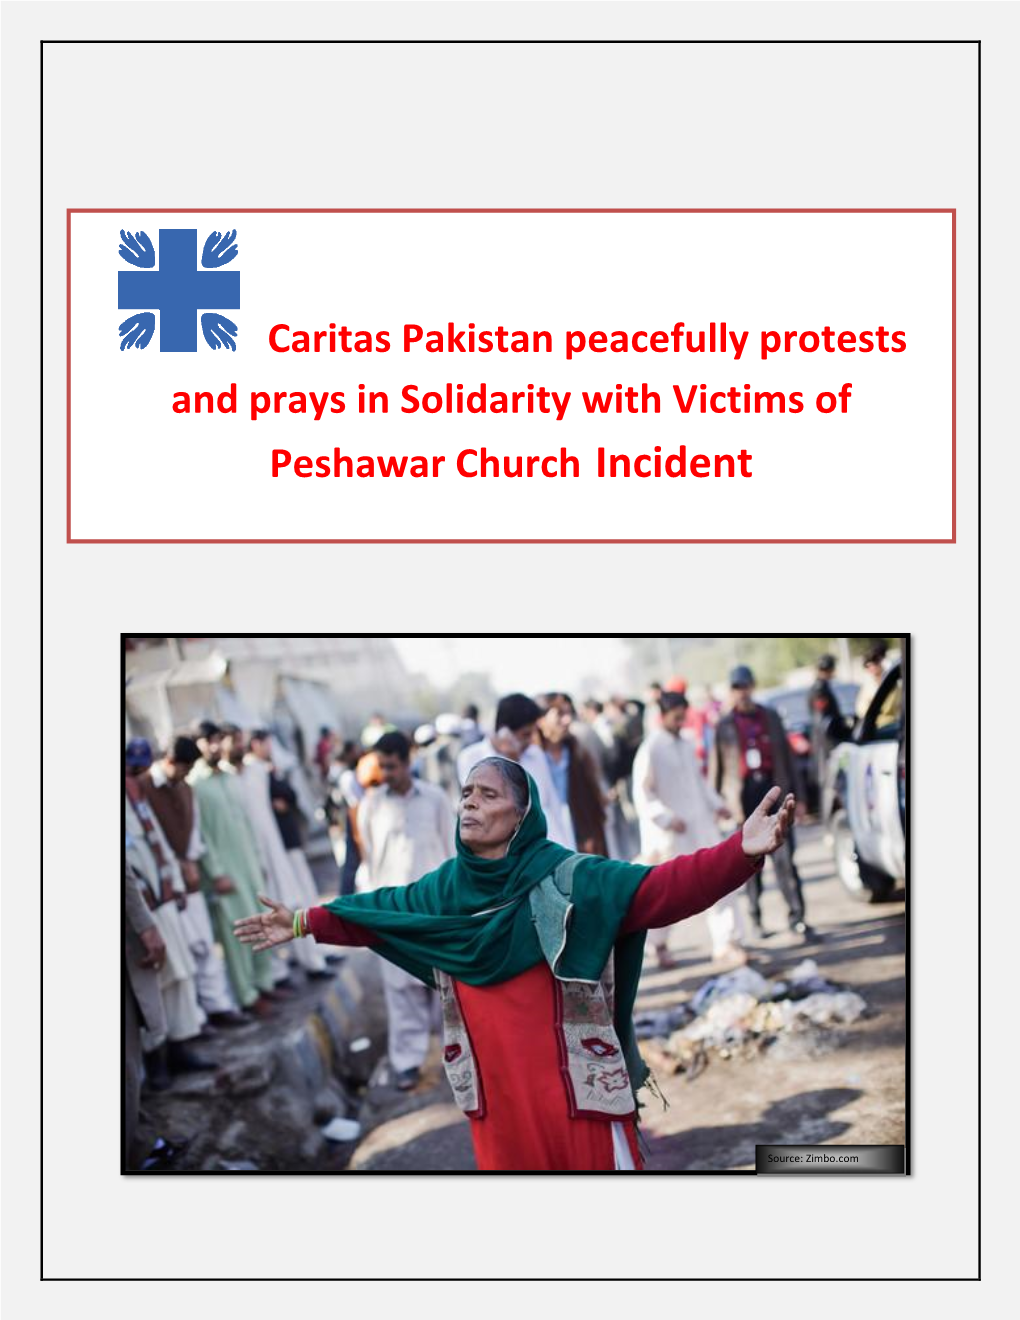 Caritas Pakistan Peacefully Protests and Prays in Solidarity with Victims